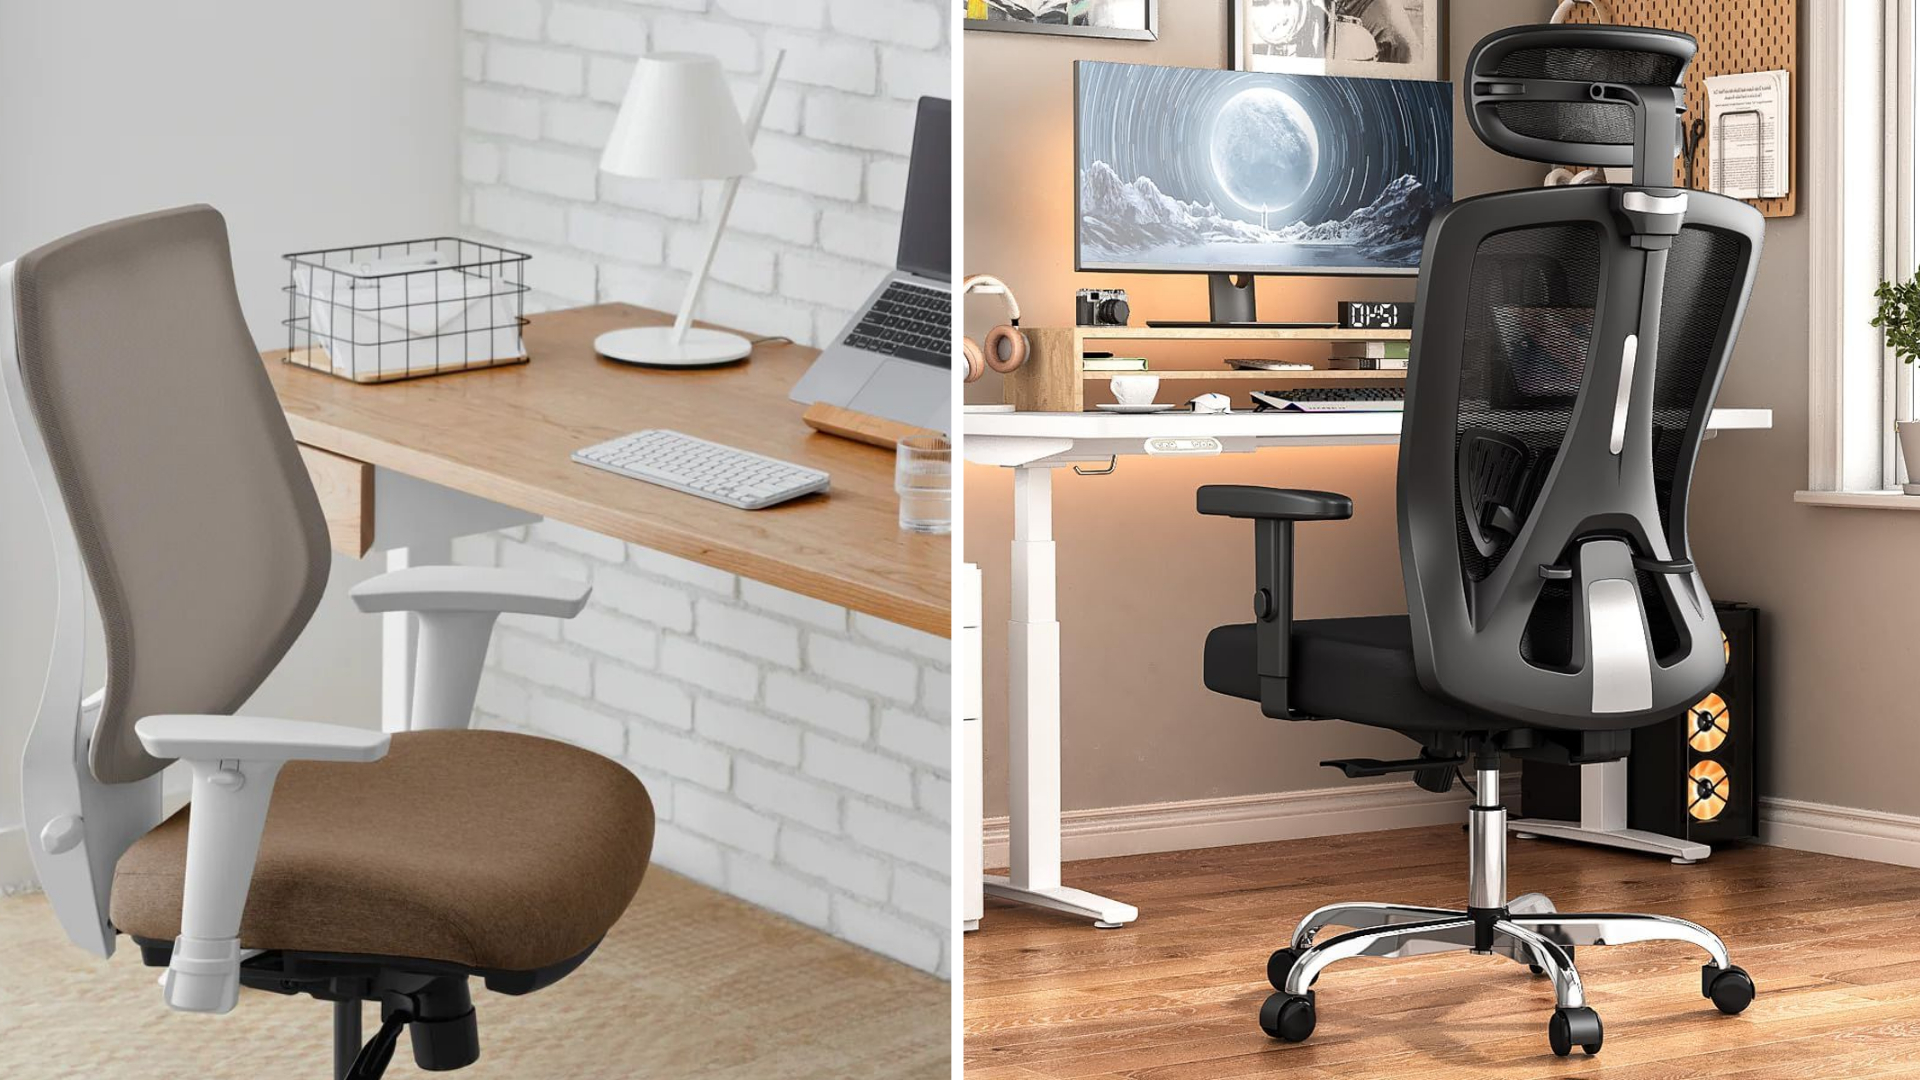 Sihoo Ergonomic Office Chair Review - Budget at What Price? - Ergonomic  Trends